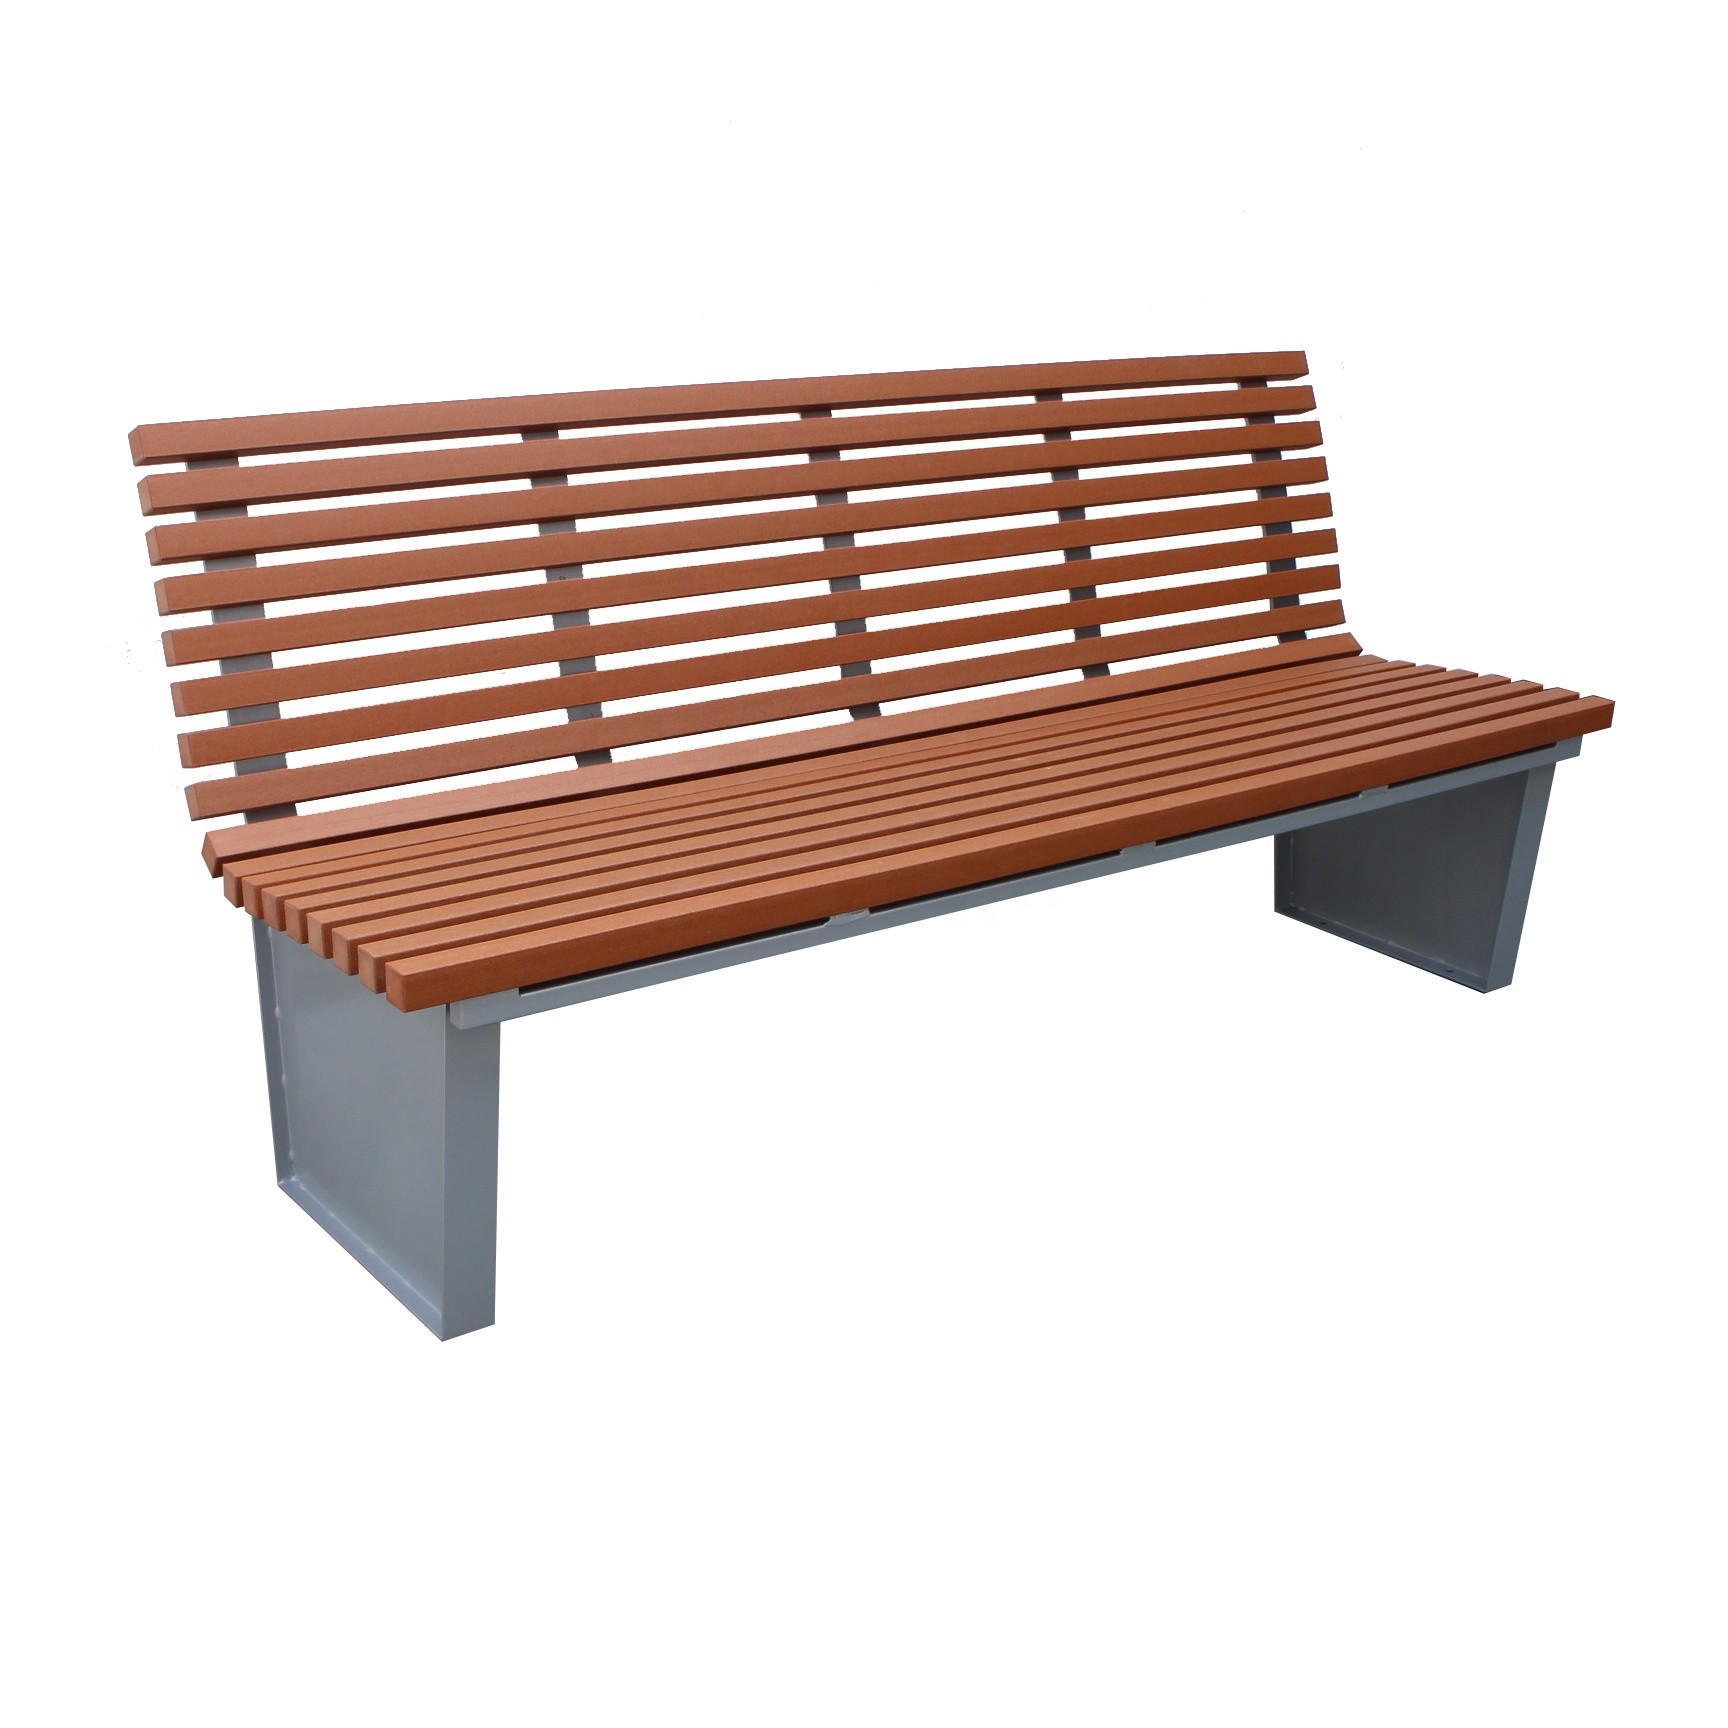 China Waterproof Outdoor Recycled Plastic Benches For Campus Villa factory